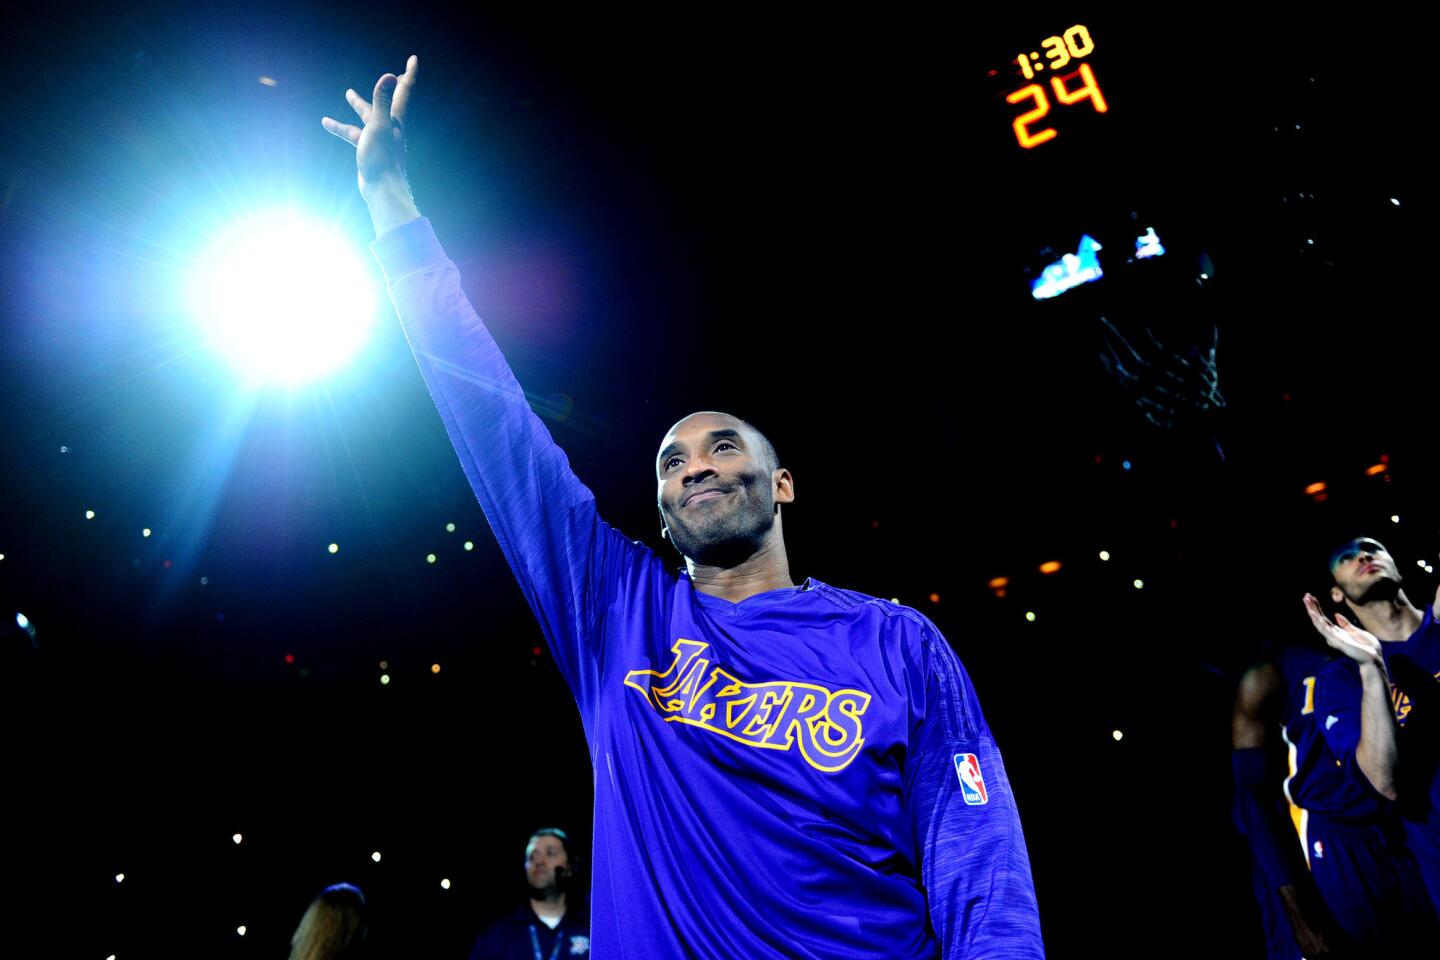 Kobe Bryant waves to the crowd as he is introduced before a game against the Thunder in Oklahoma City on April 11.